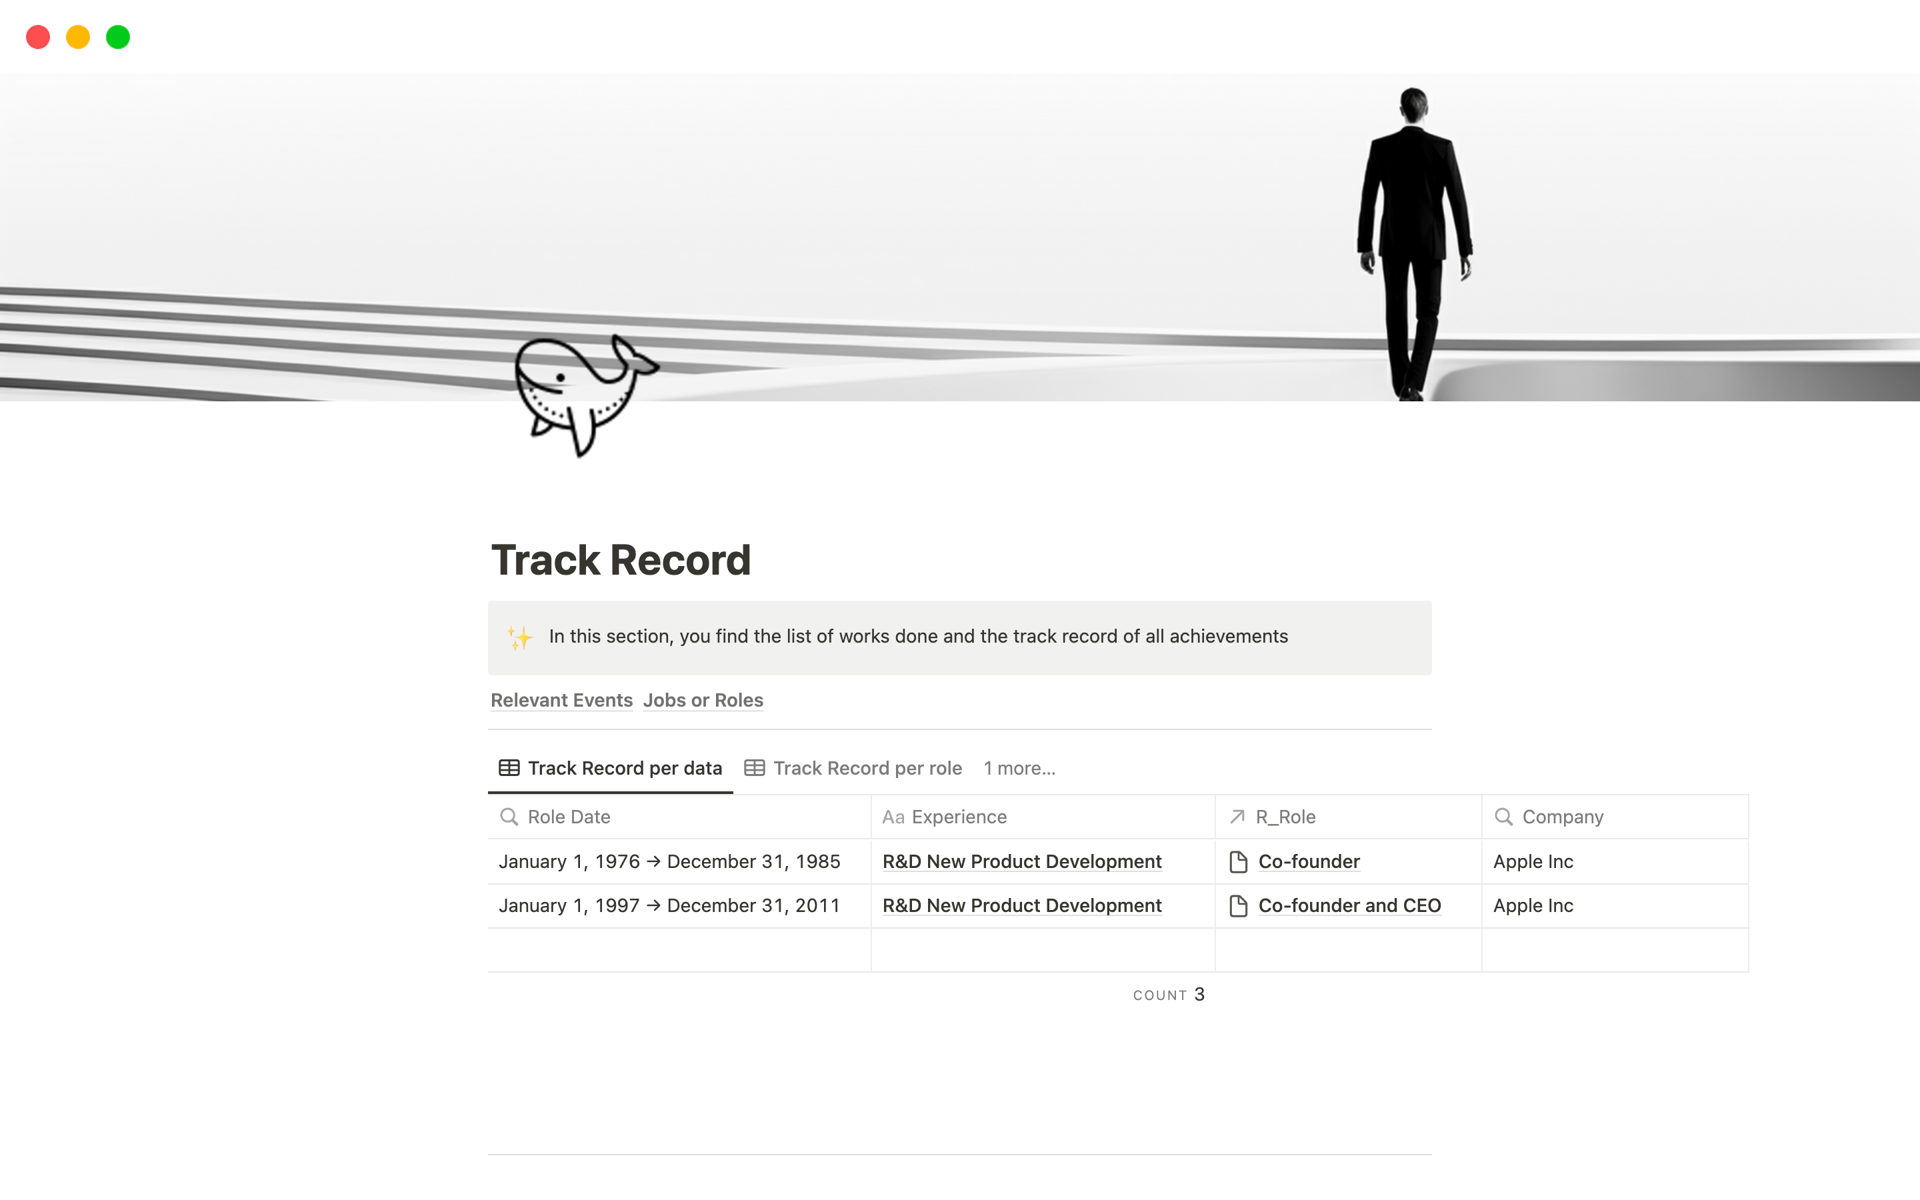 A personal record-tracking system that helps users organize and monitor their personal achievements, goals and progress.